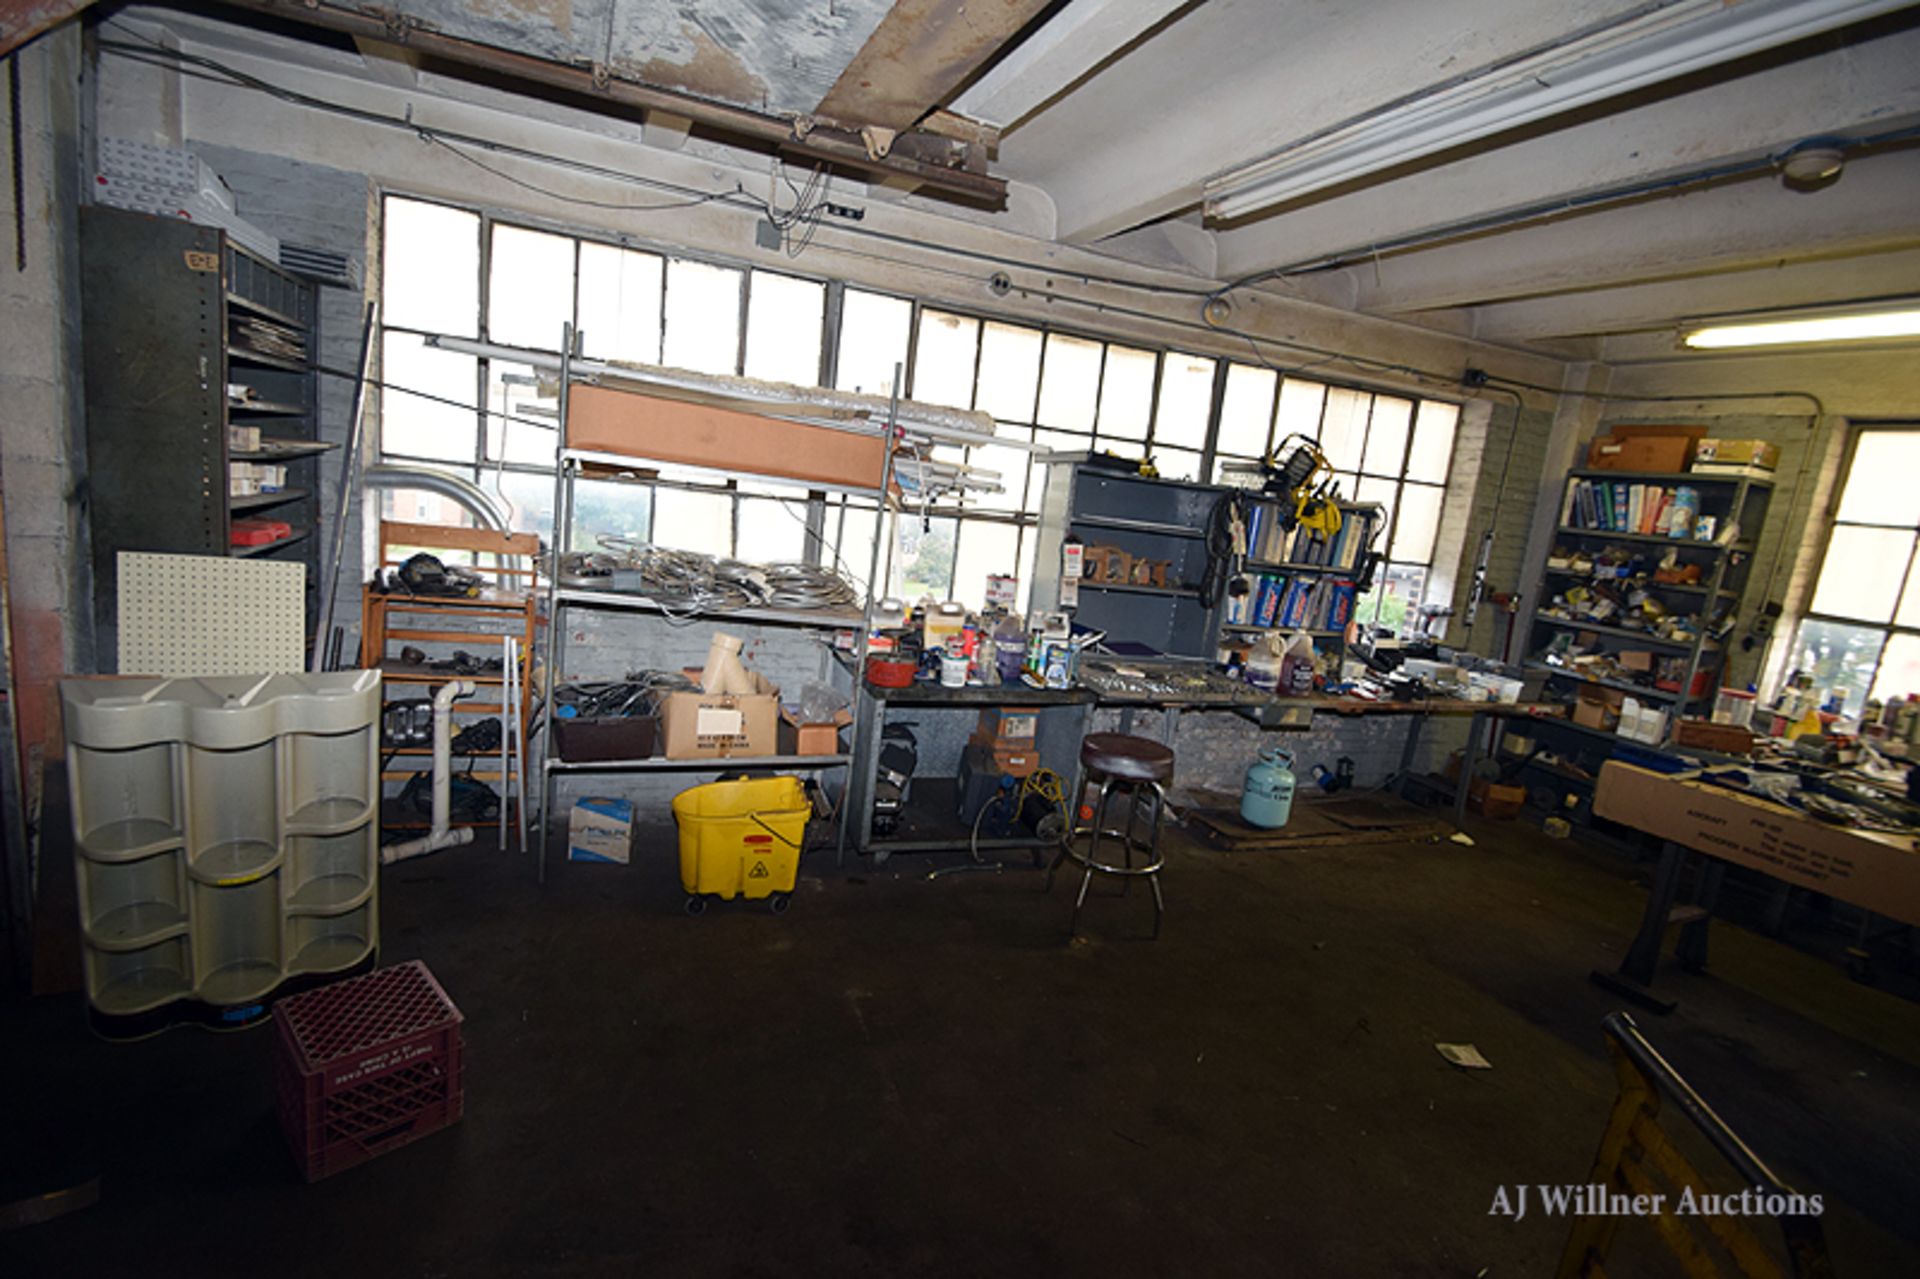 Contents of Workshop; Tools, Vacuums, Parts, Etc. - Image 2 of 13